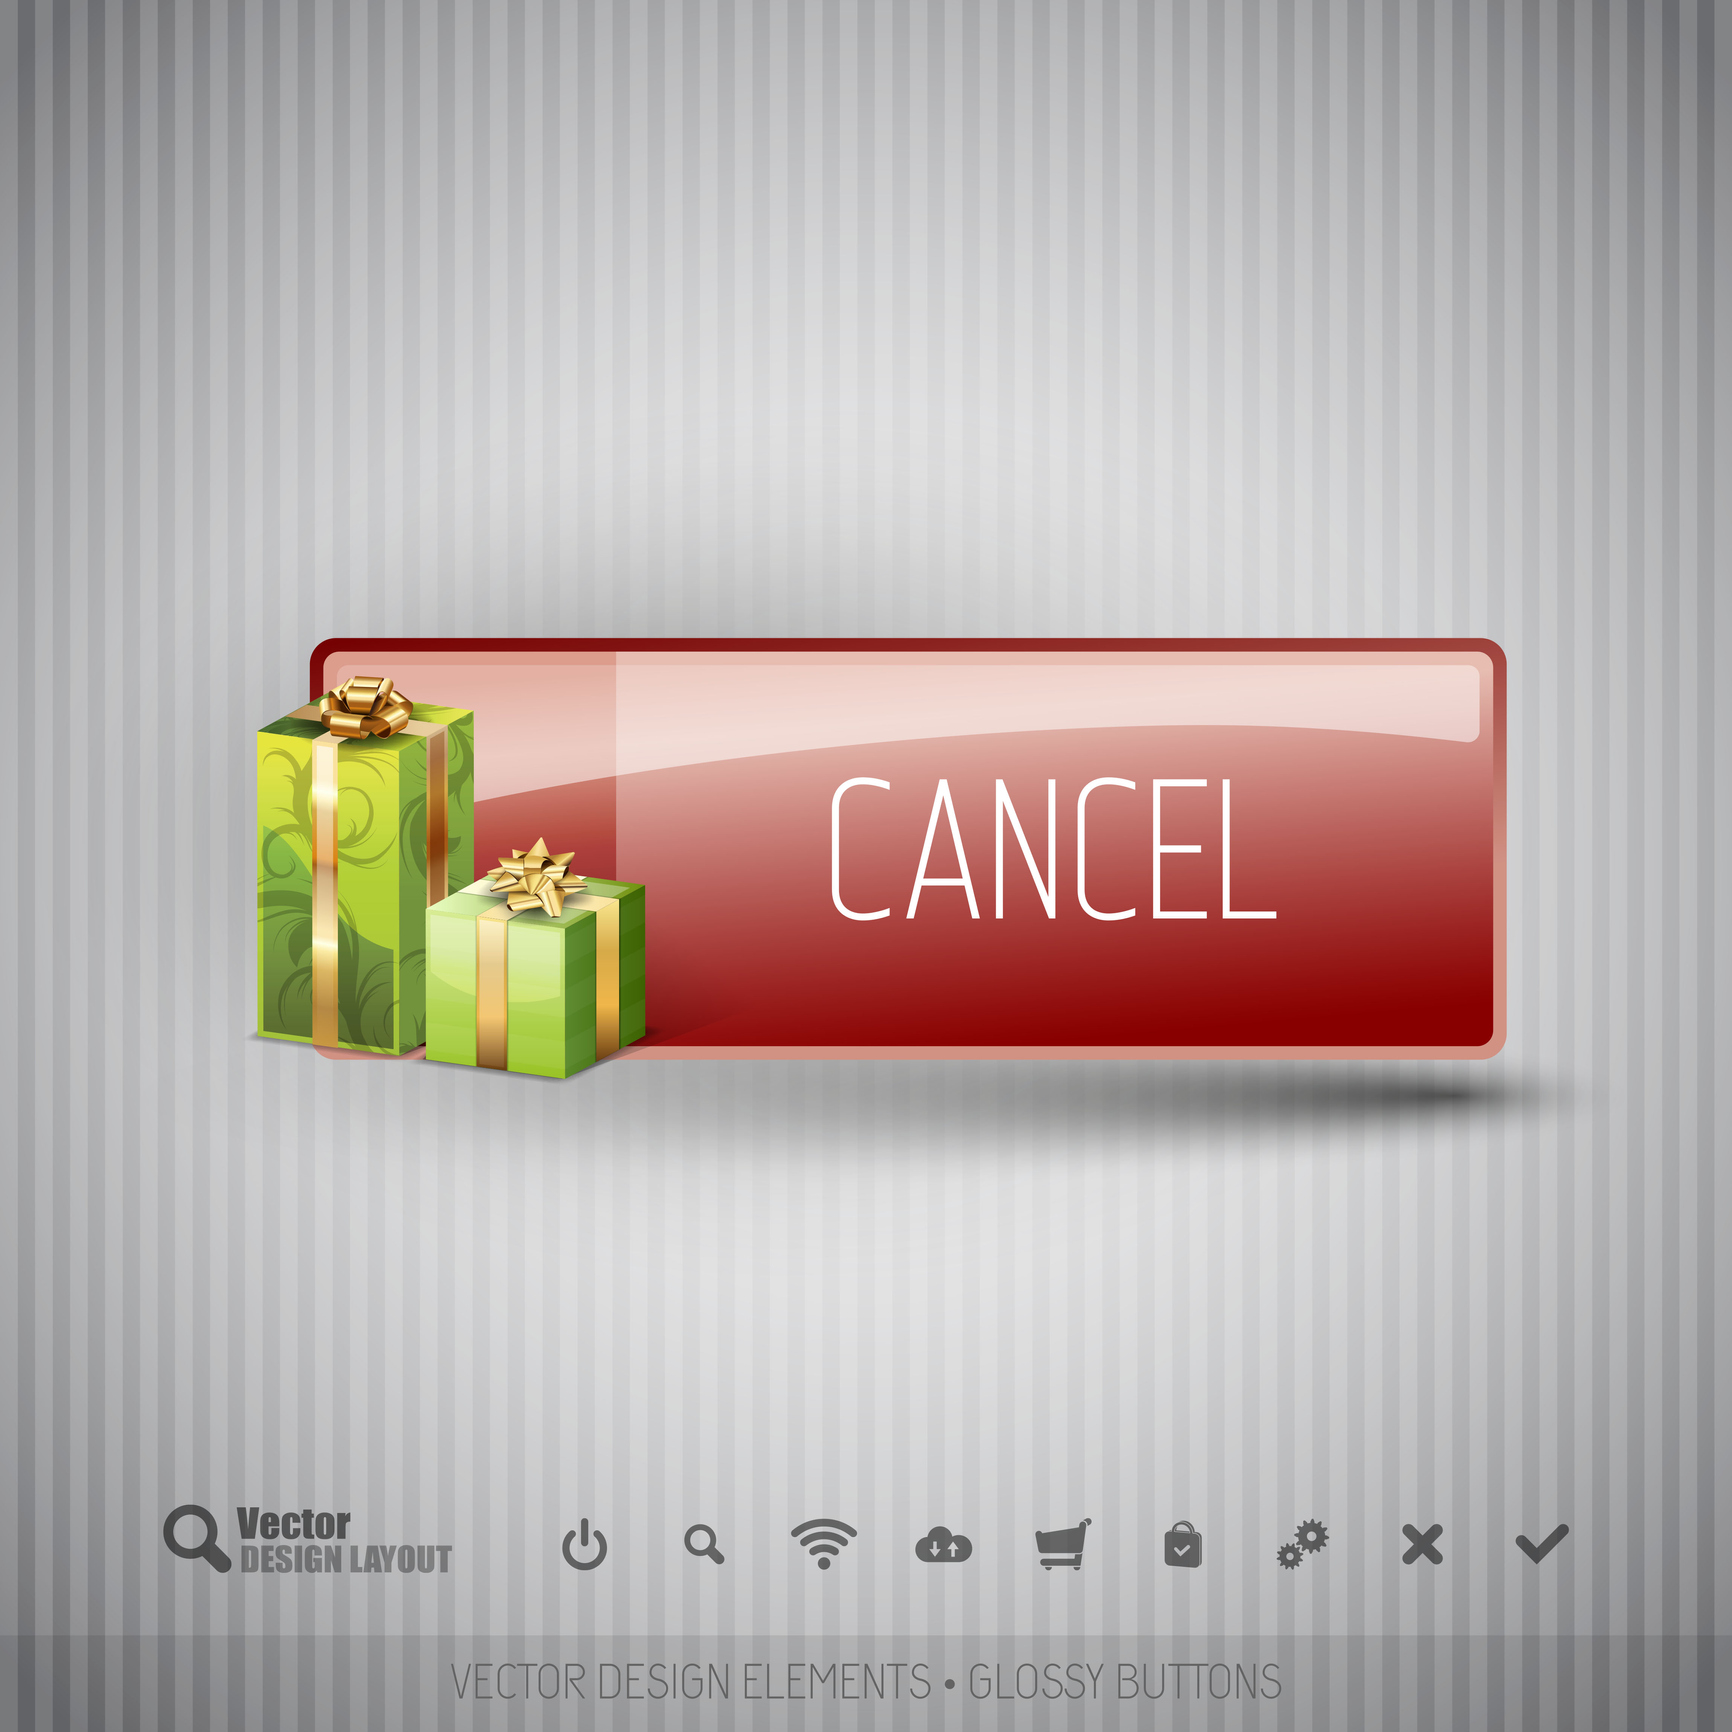 How to Pivot if Your Company Holiday Party is Cancelled